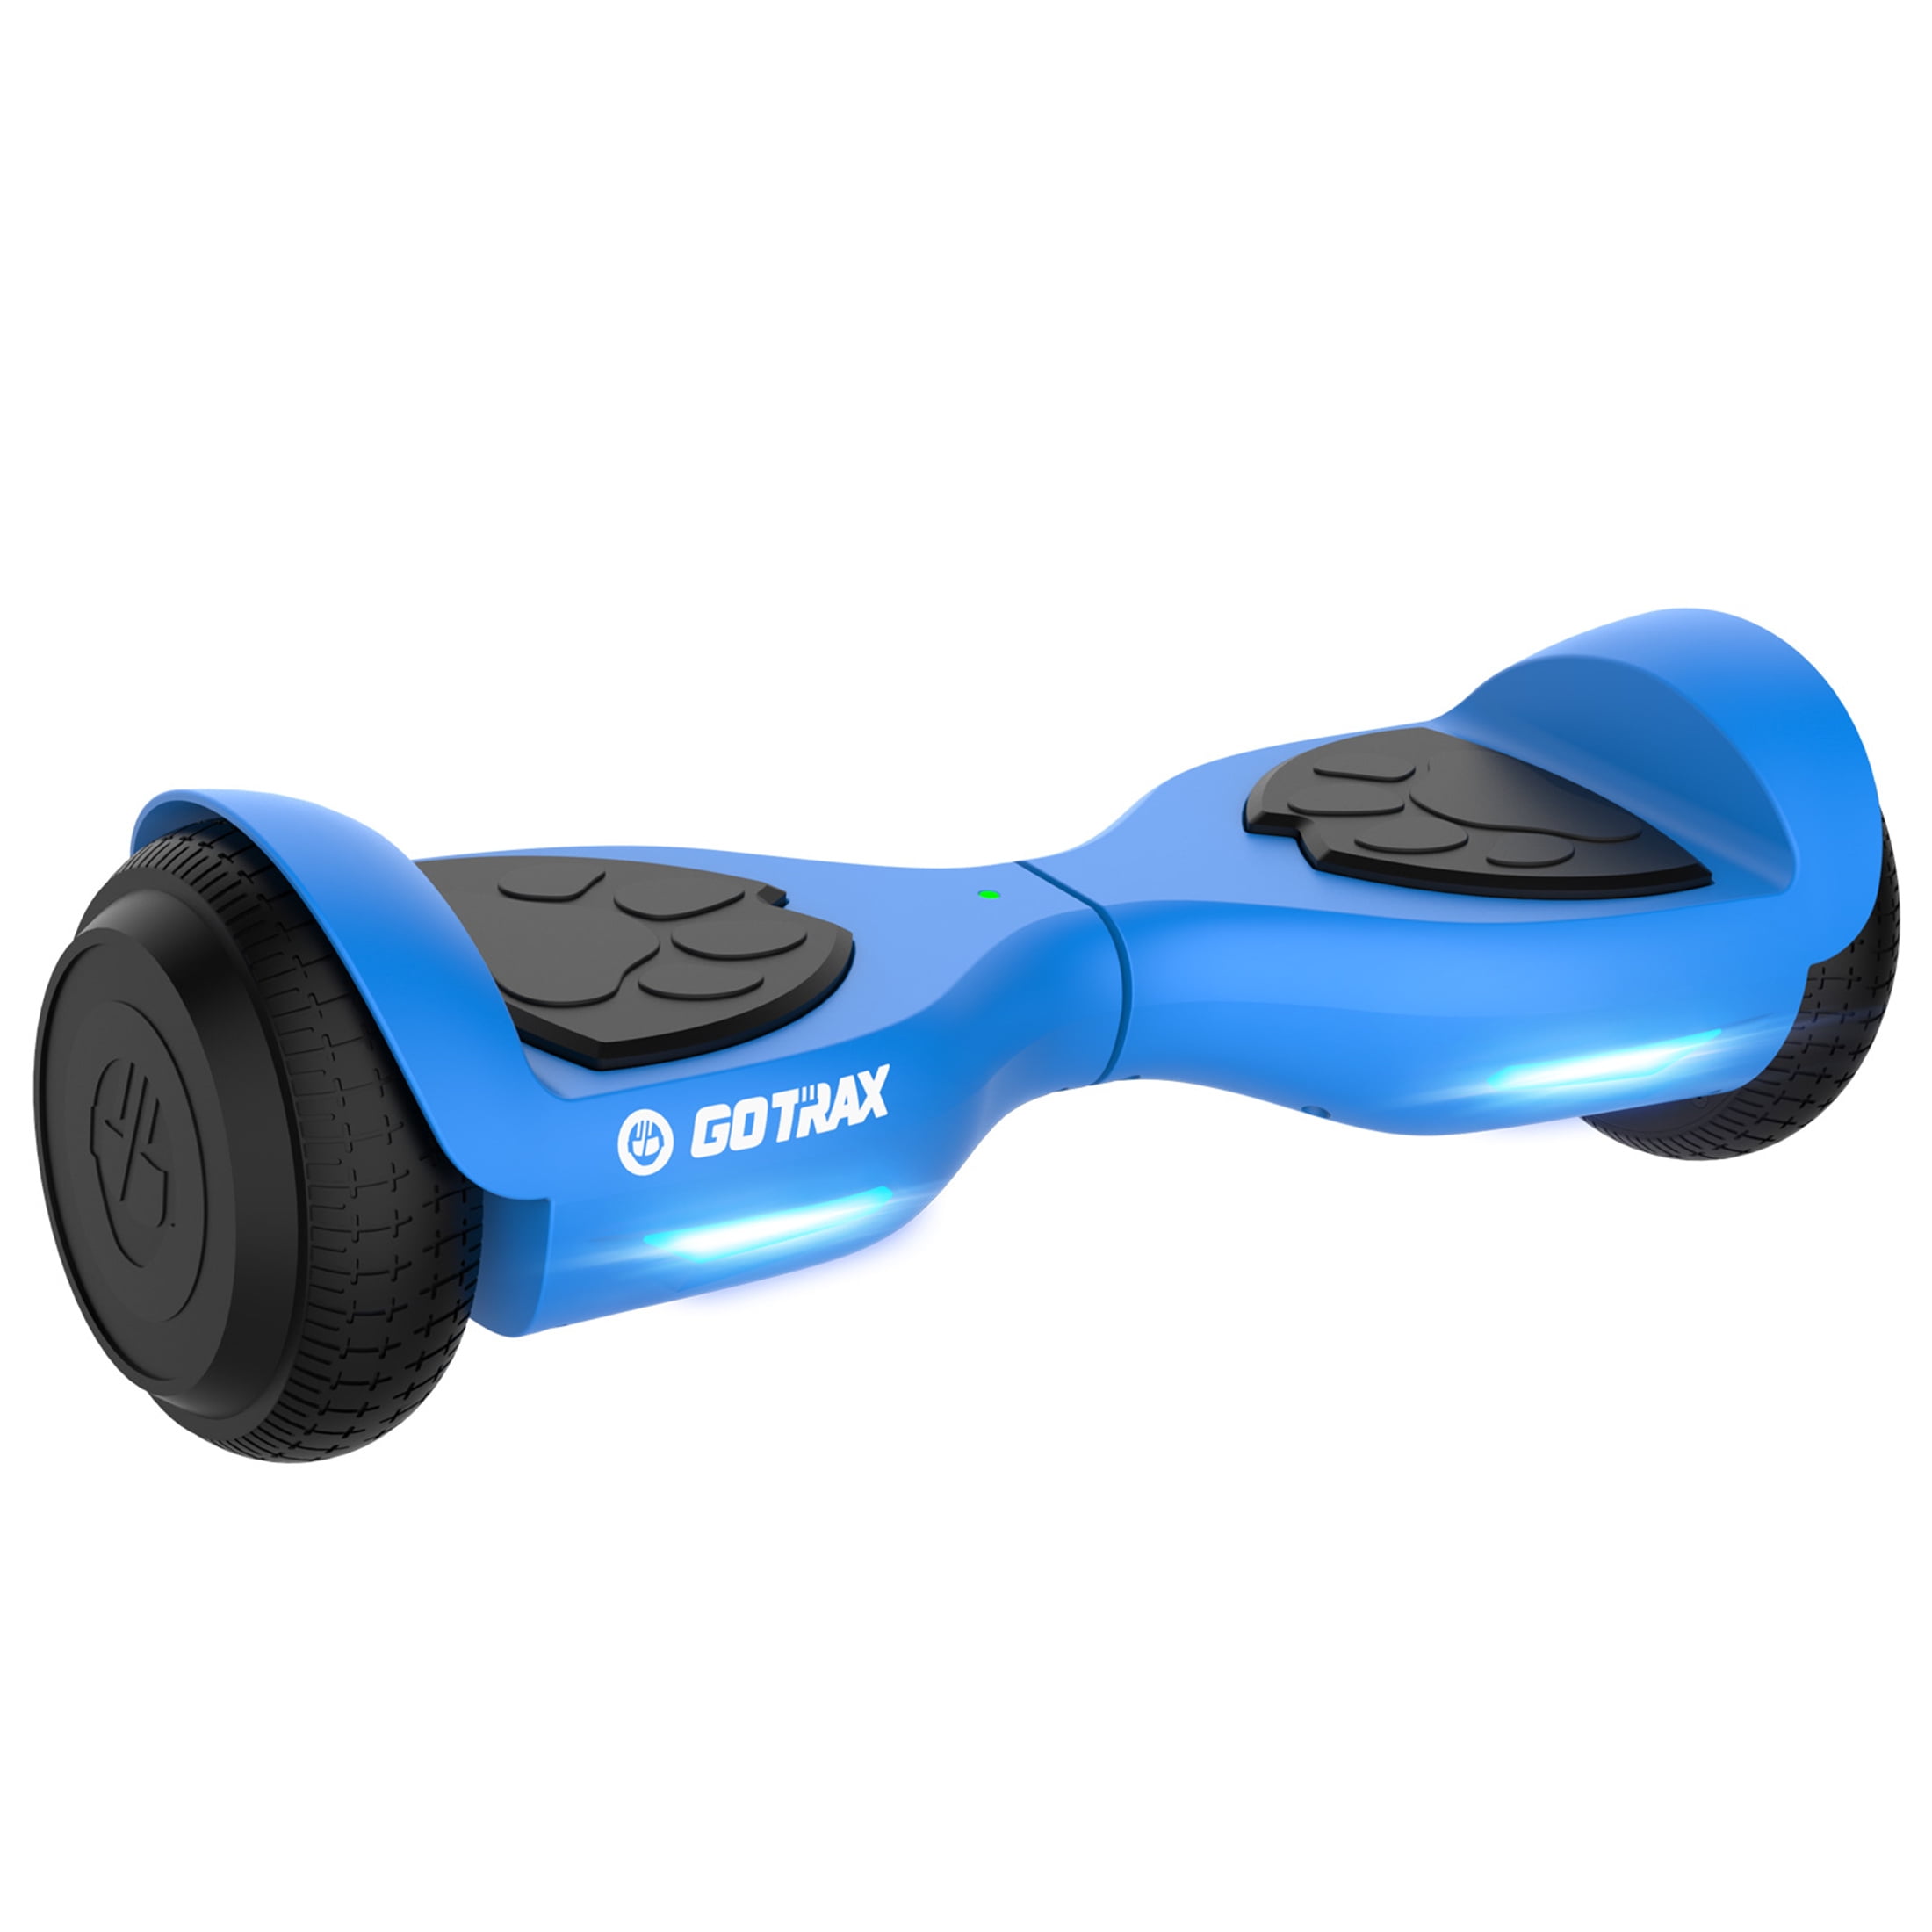 Gotrax Lil Cub Kids Hoverboard with 6.5" Wheels & LED Front Light, Max 2.5 Miles and 6.2mph Self Balancing Scooter for 44-88lbs Kids Blue